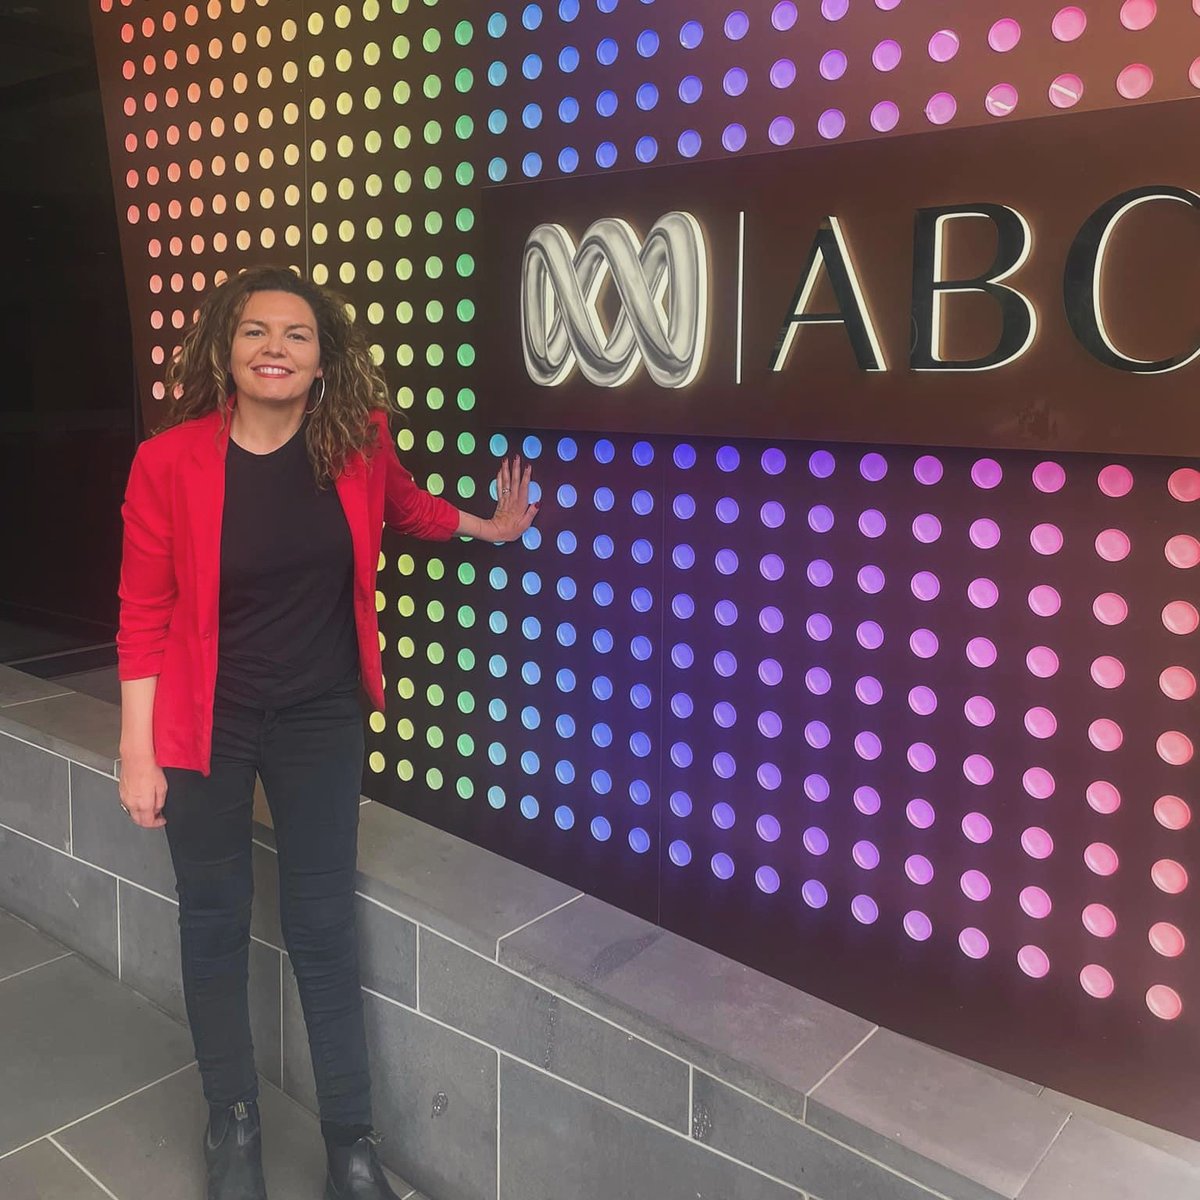 Some very exciting news!! On the fourth Monday of every month I’ll be joining @dontattempt on @abcmelbourne ‘Evenings’ at 9pm highlighting incredible Disability Arts & Culture in Vic. Listen this Monday at 9pm & every fourth Monday. Pm me your suggestions on what I should cover.